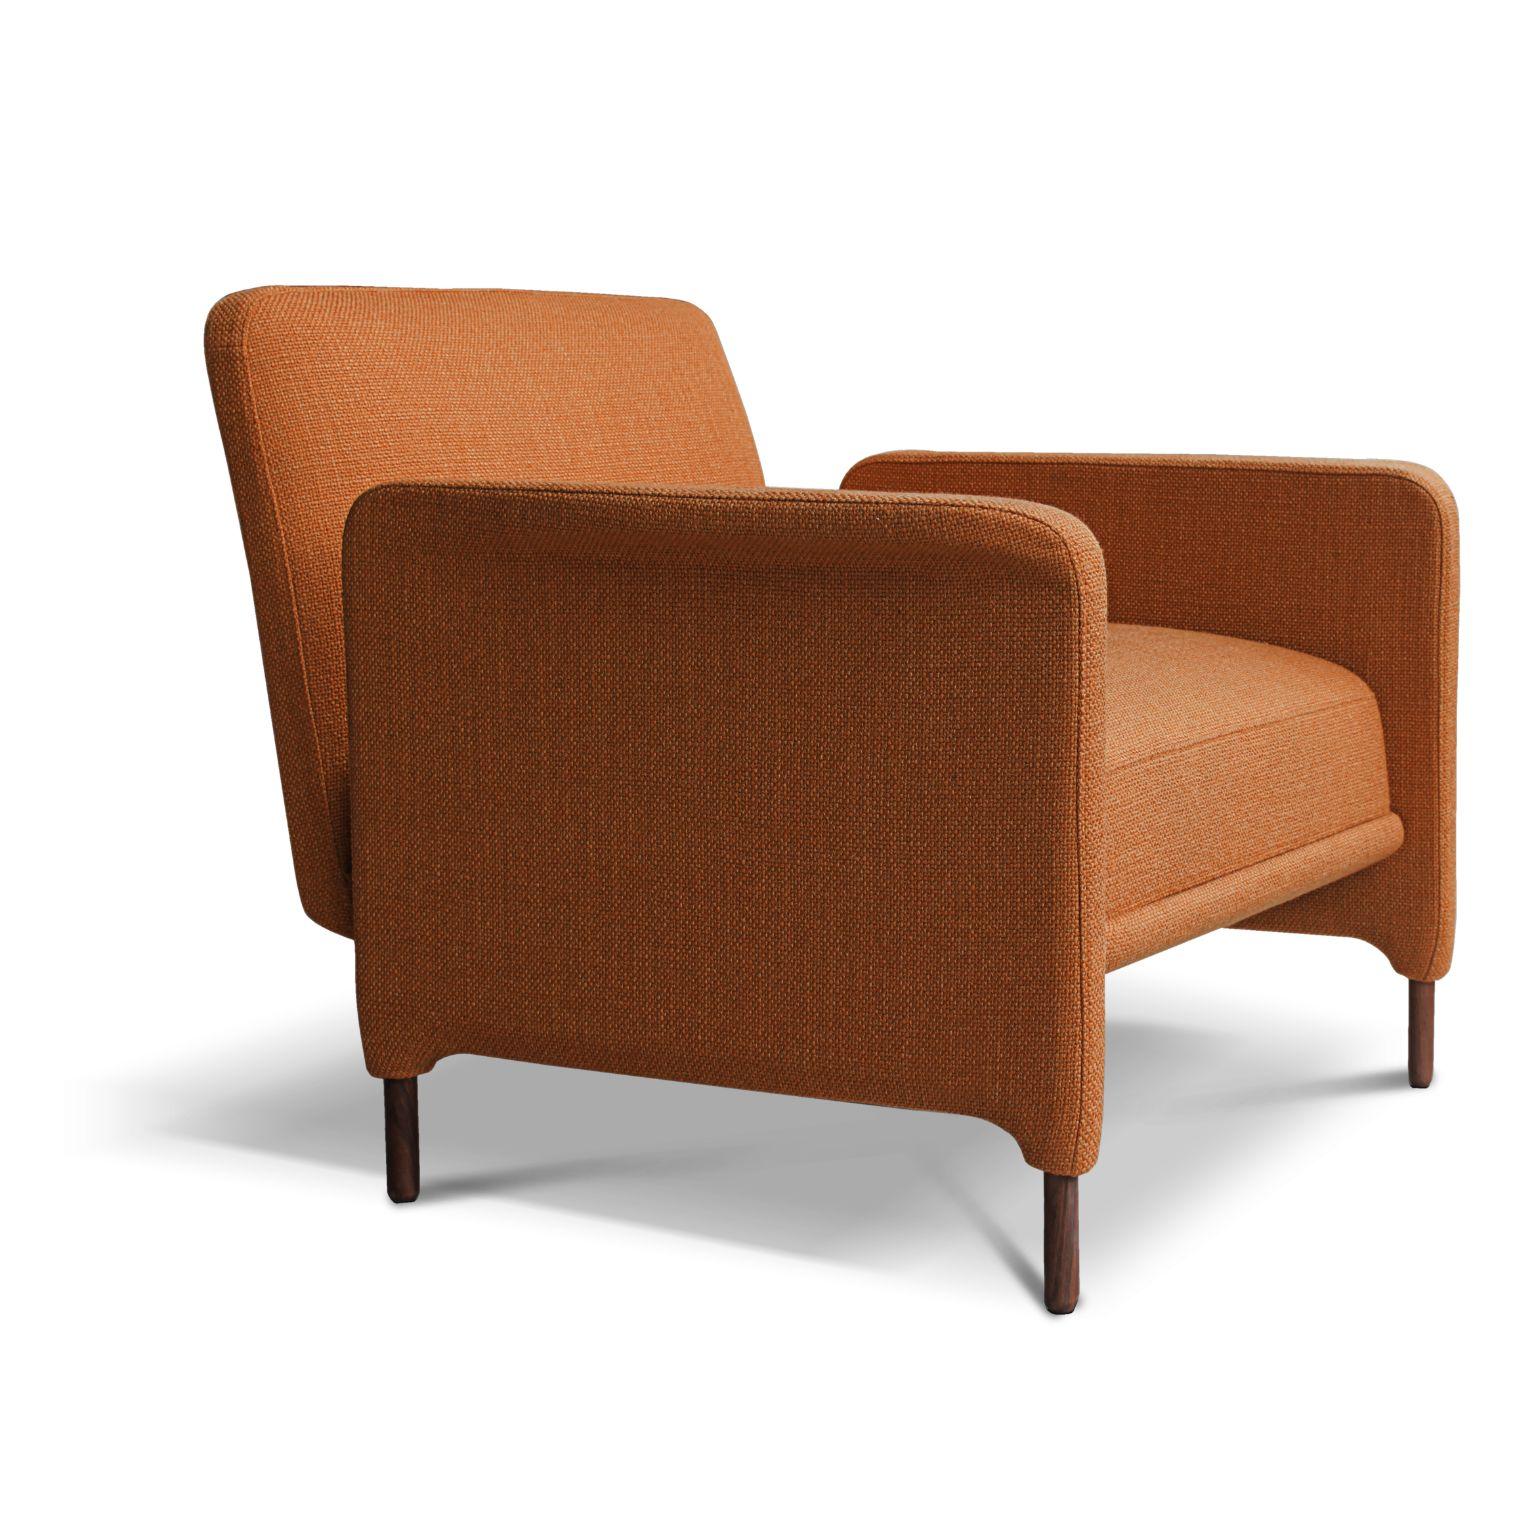 Set of 2 Orange Carson armchair by Collector
Materials: fully upholstered in boho 10 fabric
 Solid walnut feet
Dimensions: W 86 x D 76 x H 70 cm 
 SH 43 cm 

Your favorite chair will be the one that allows you to relax in a way that make your